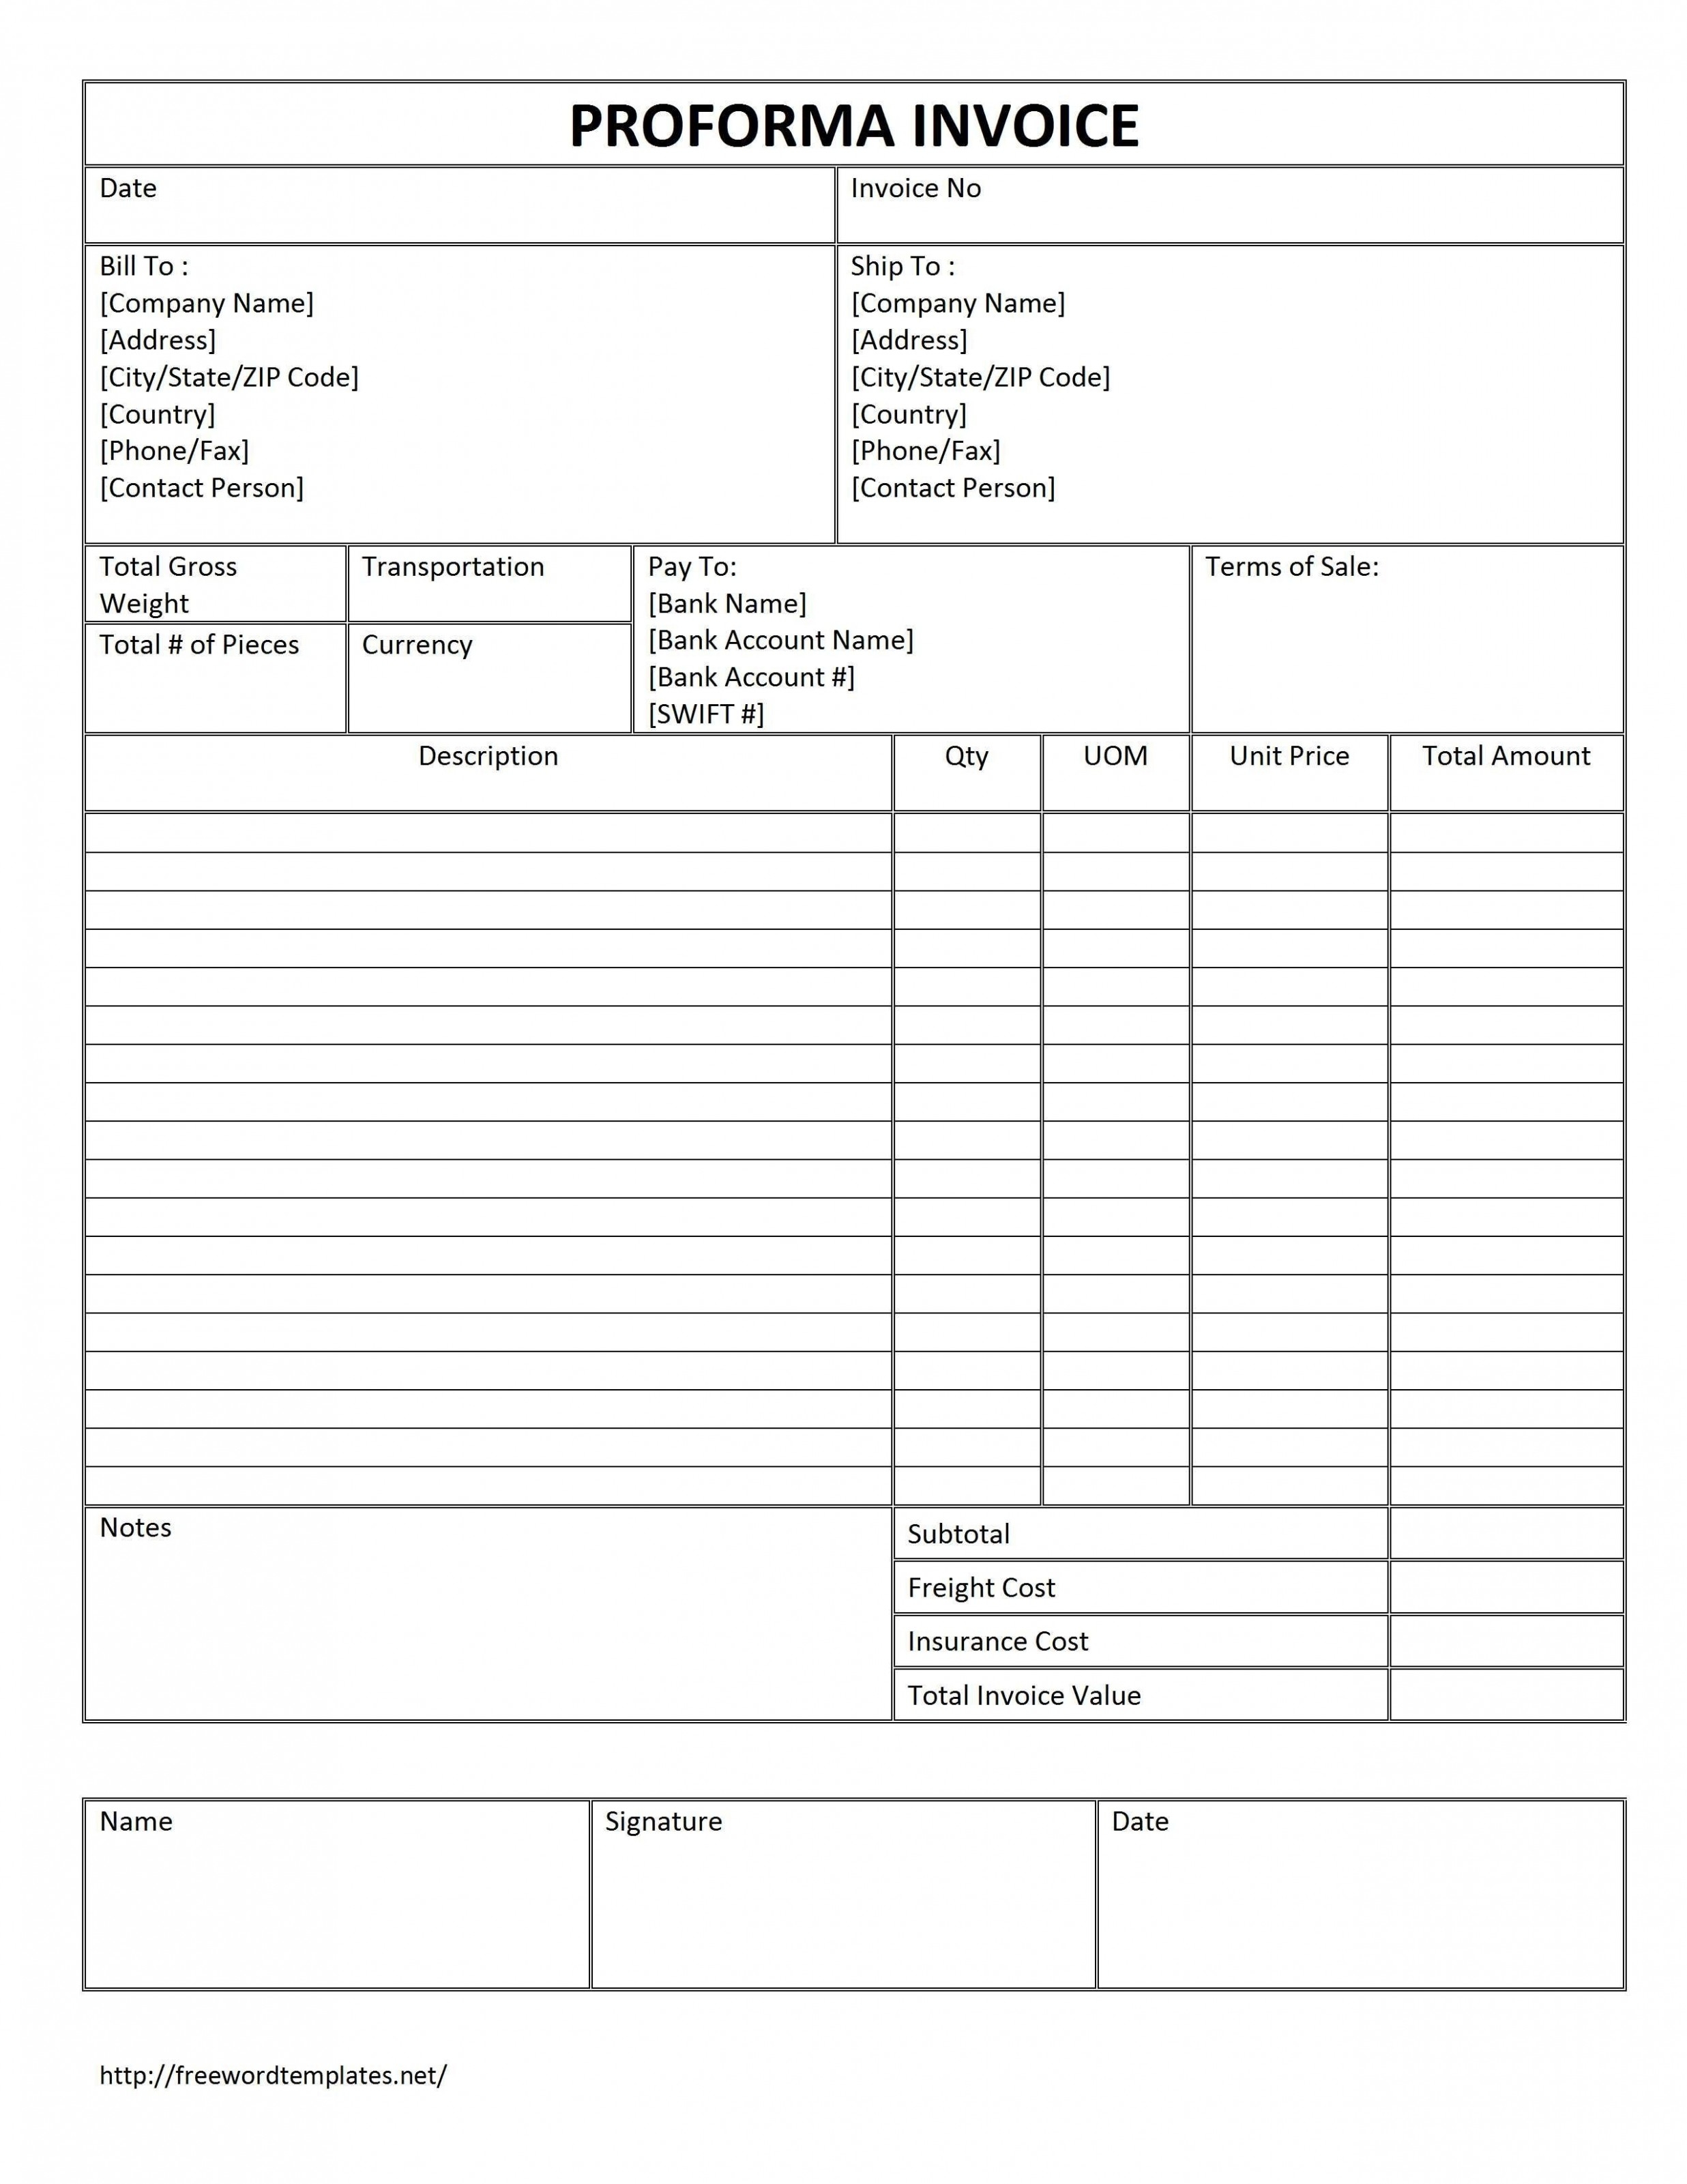 invoice format for advance payment invoice template 50 advance payment invoice format